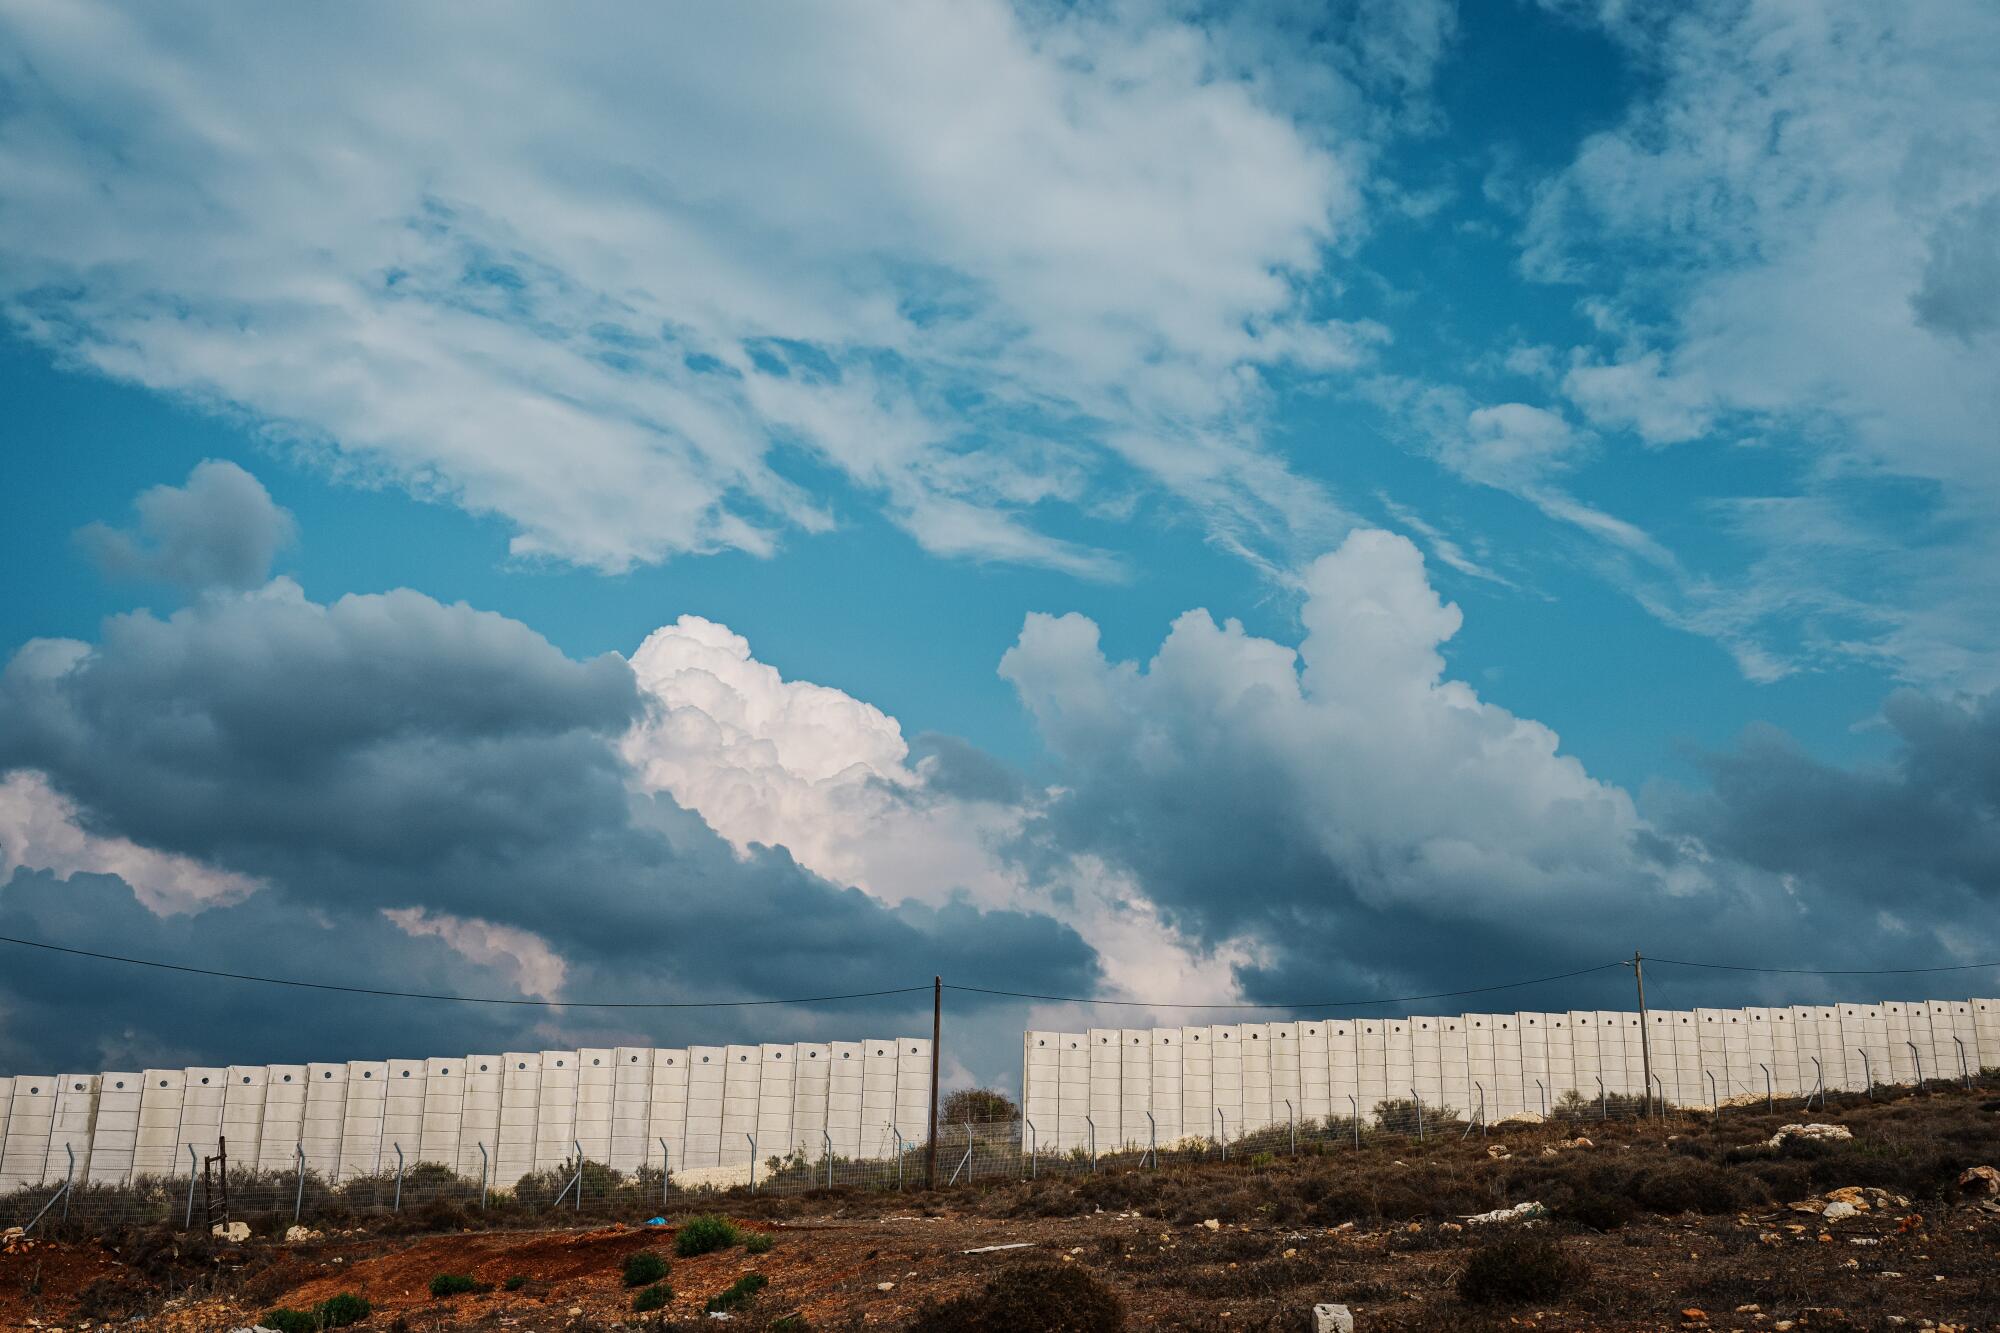 A white border fence seen against blue skies and clouds